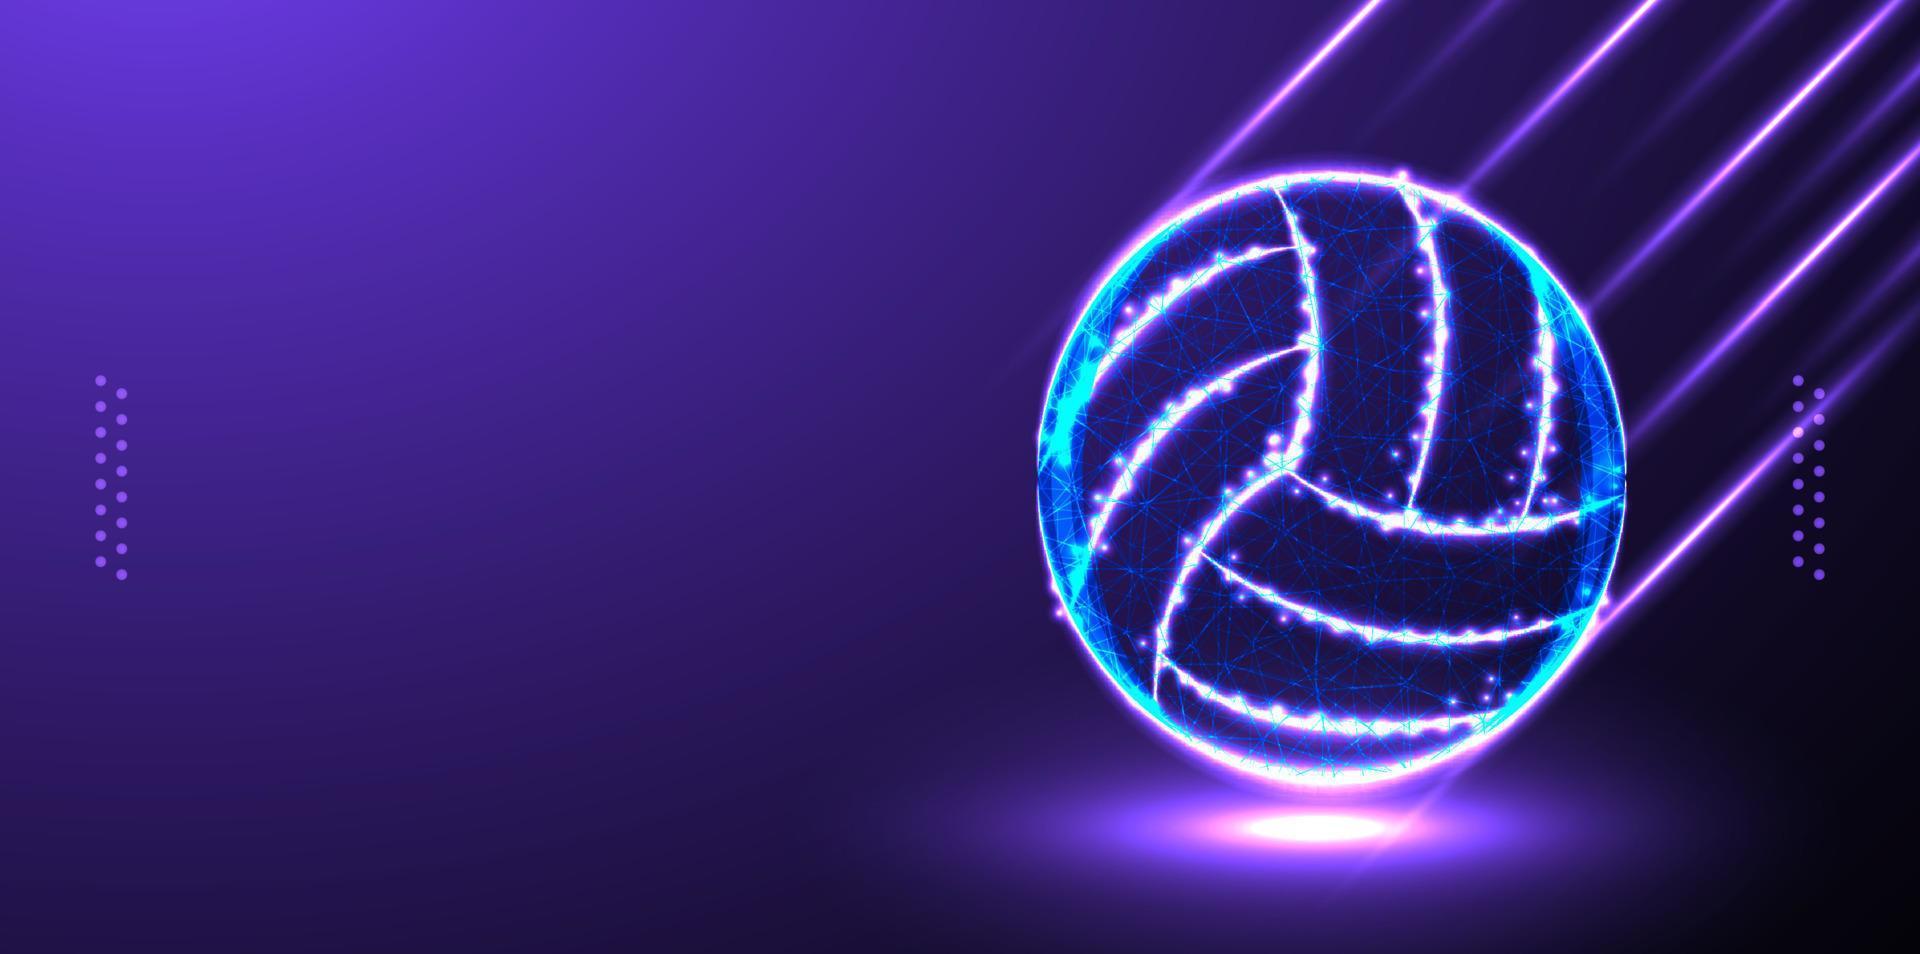 Free download Cool Volleyball Wallpaper For Iphone Widescreen wallpaper  700x700 for your Desktop Mobile  Tablet  Explore 43 Volleyball  Wallpaper Design  Volleyball Backgrounds Cool Wallpaper Design Volleyball  Wallpapers